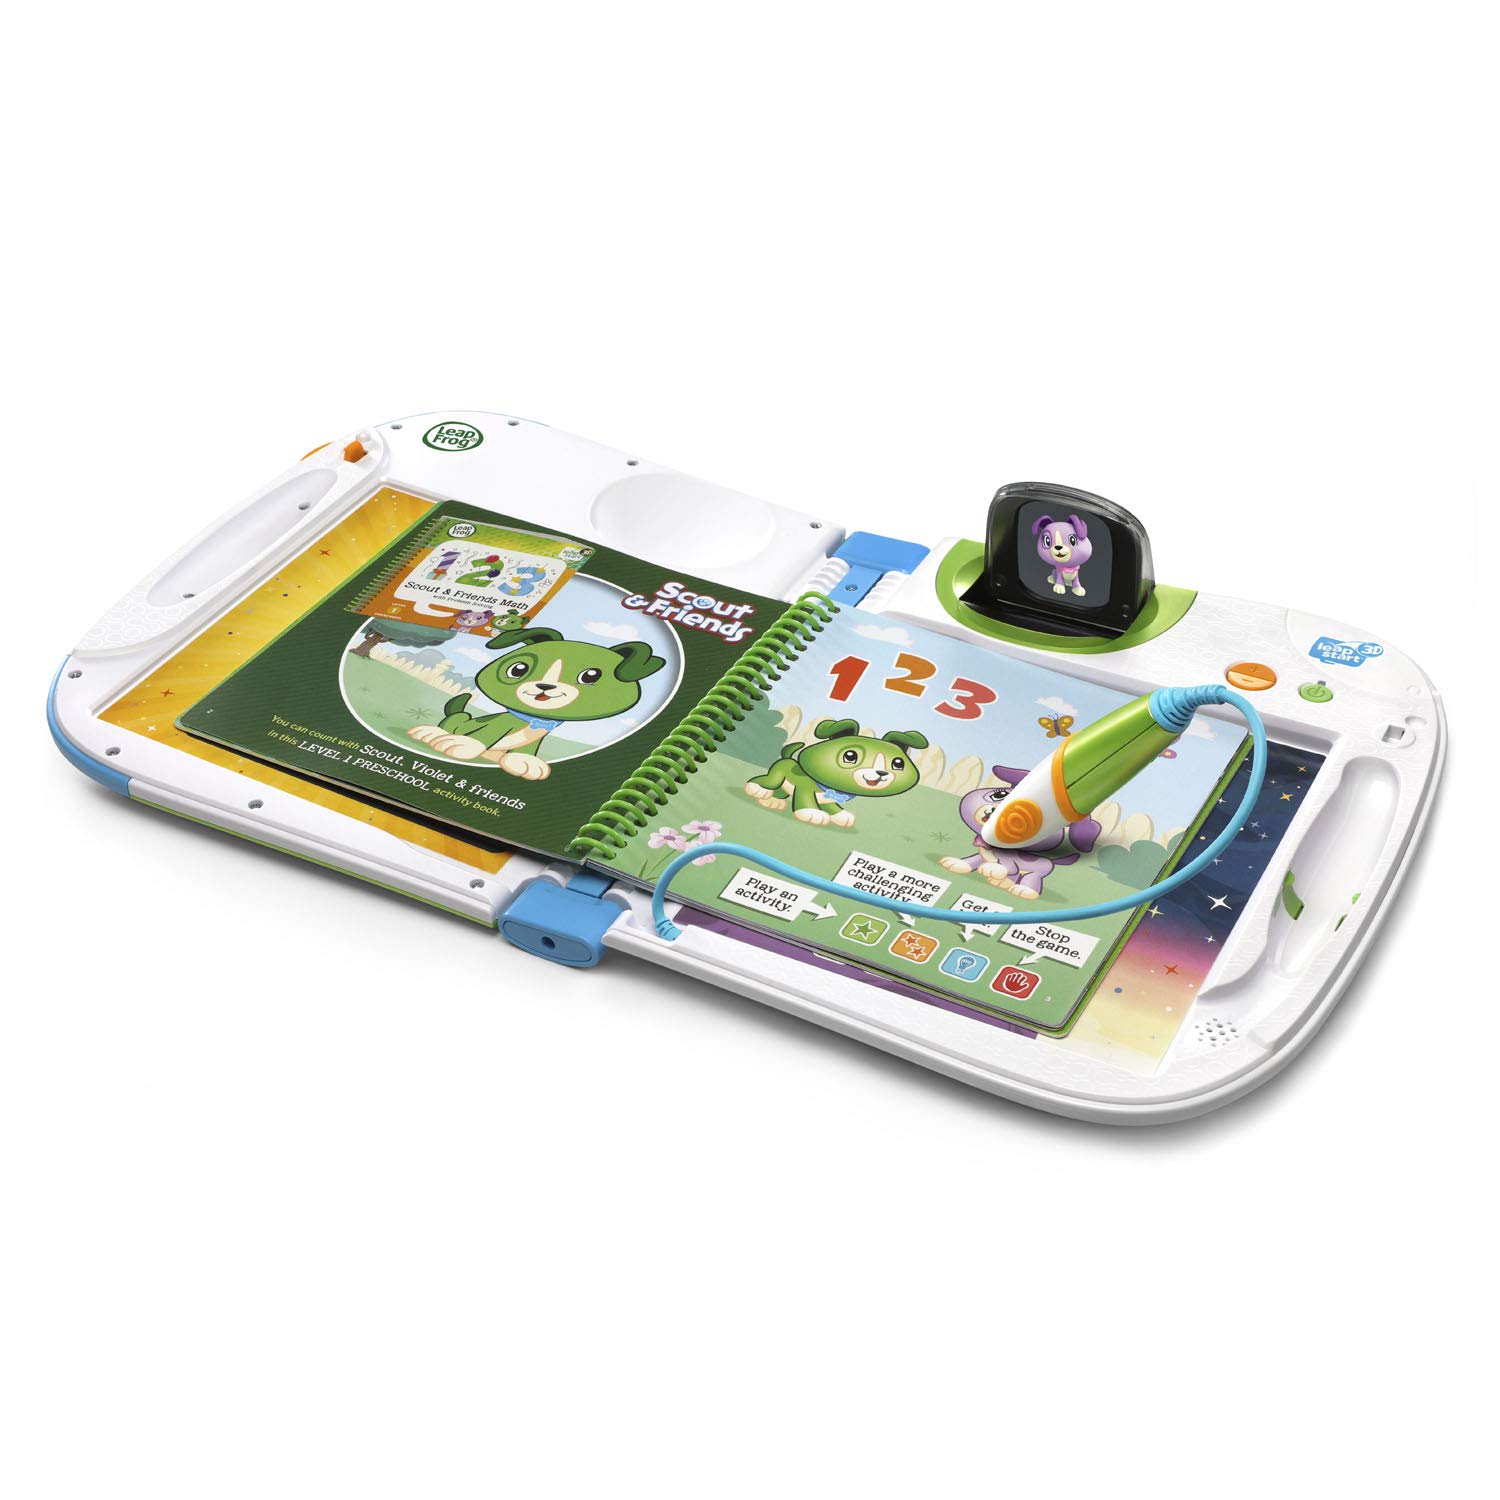 LeapStart 3D Interactive Learning System